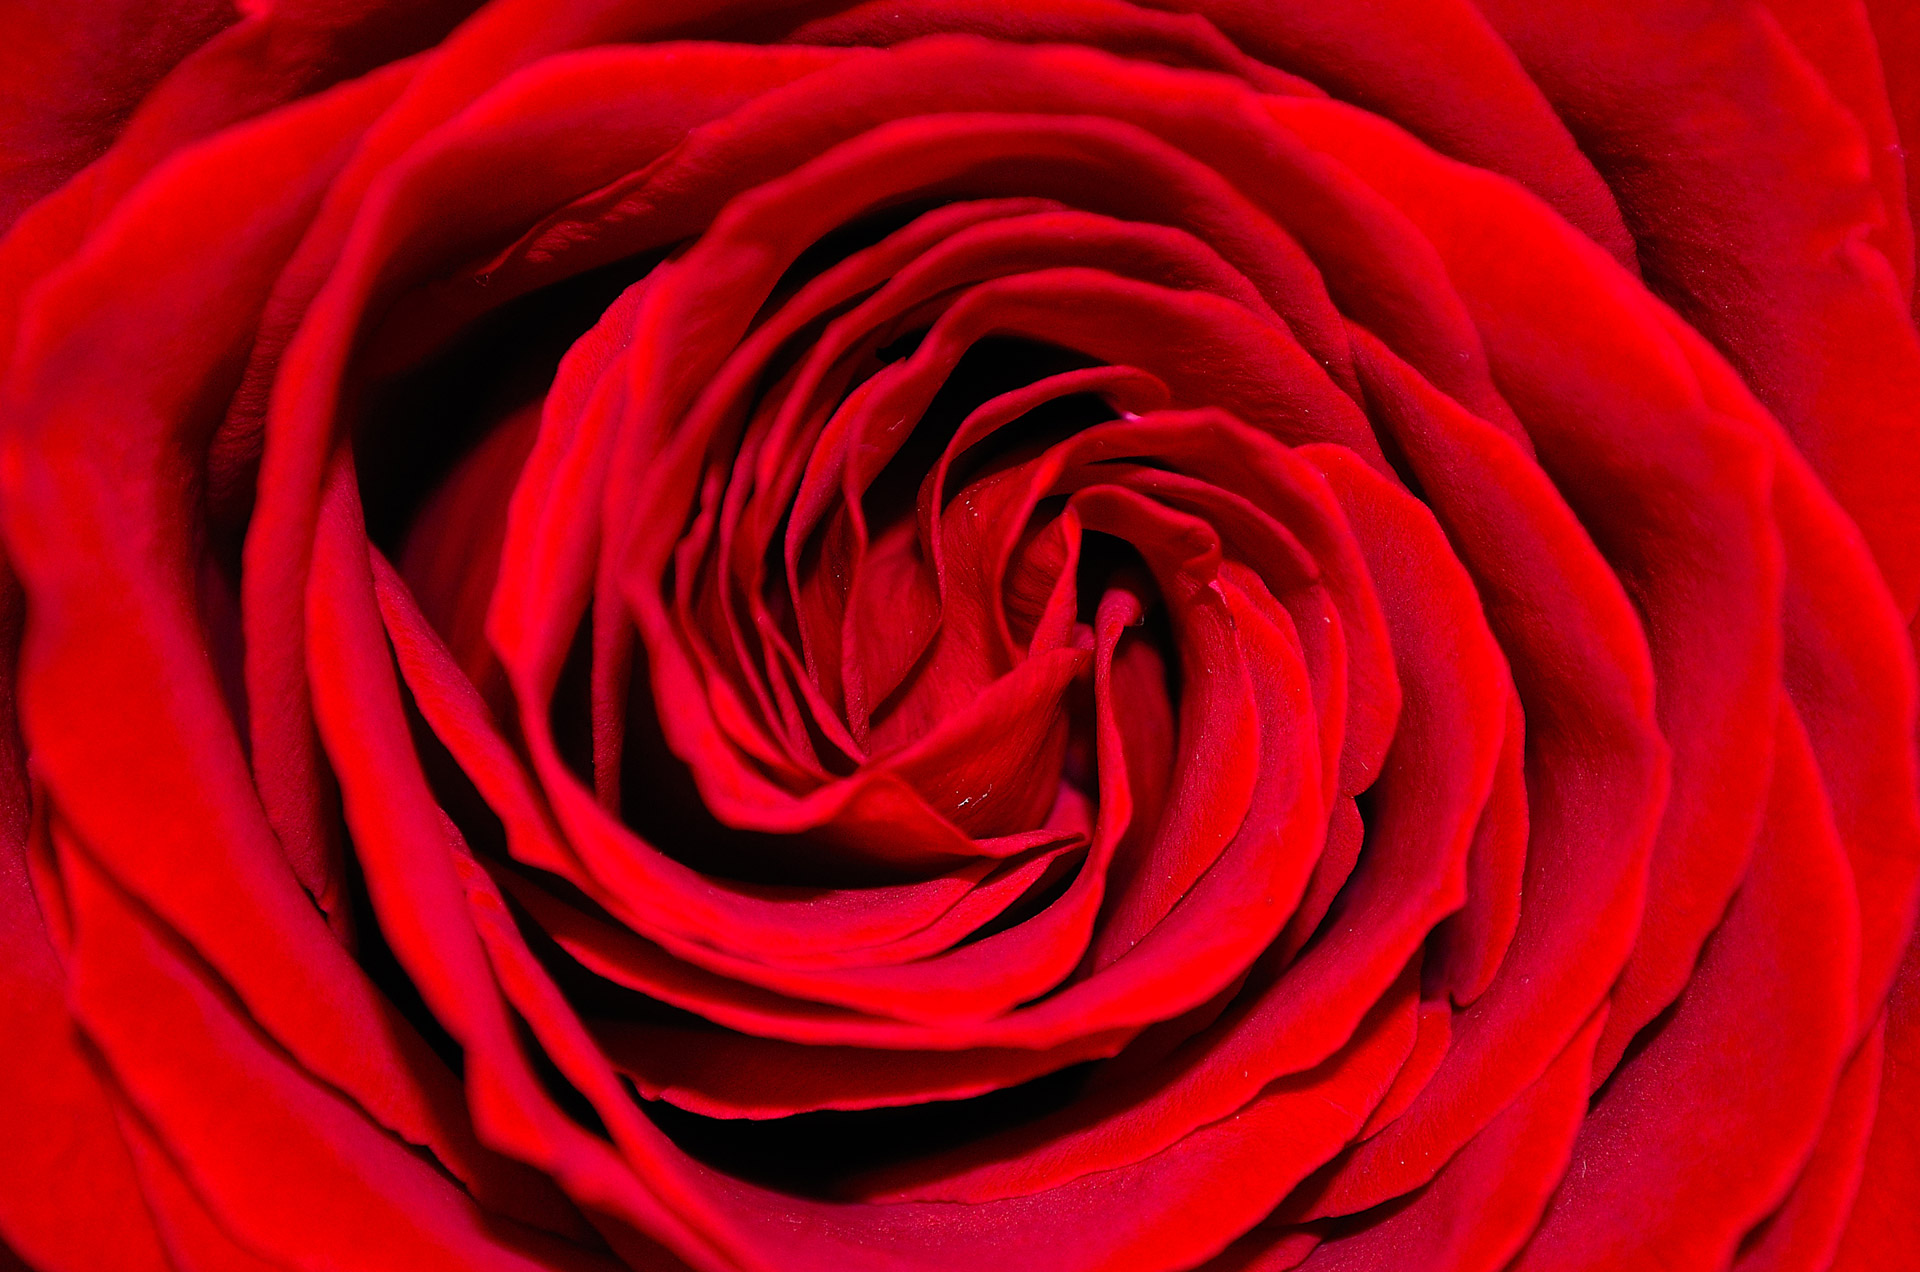 Red Rose   Background Free Stock Photo HD   Public Domain Pictures